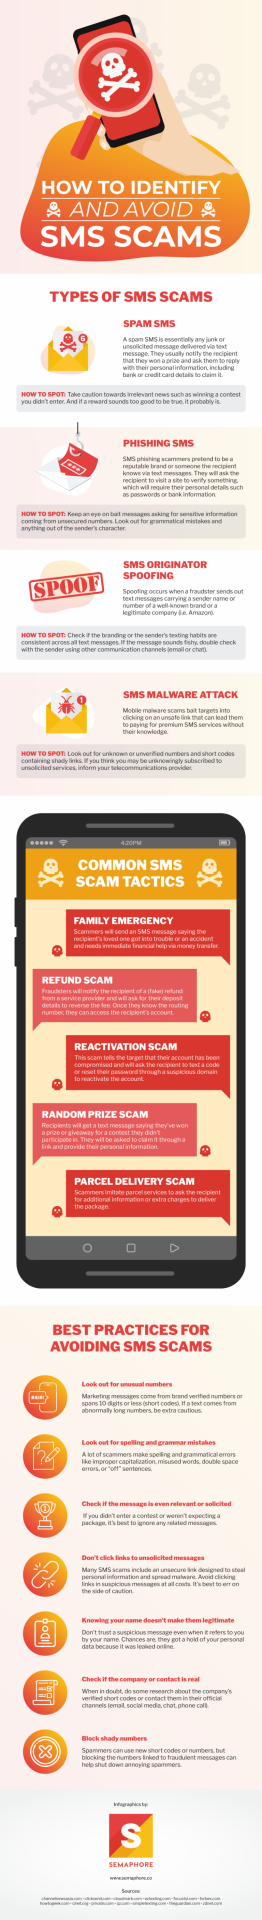 How To Avoid SMS Scams